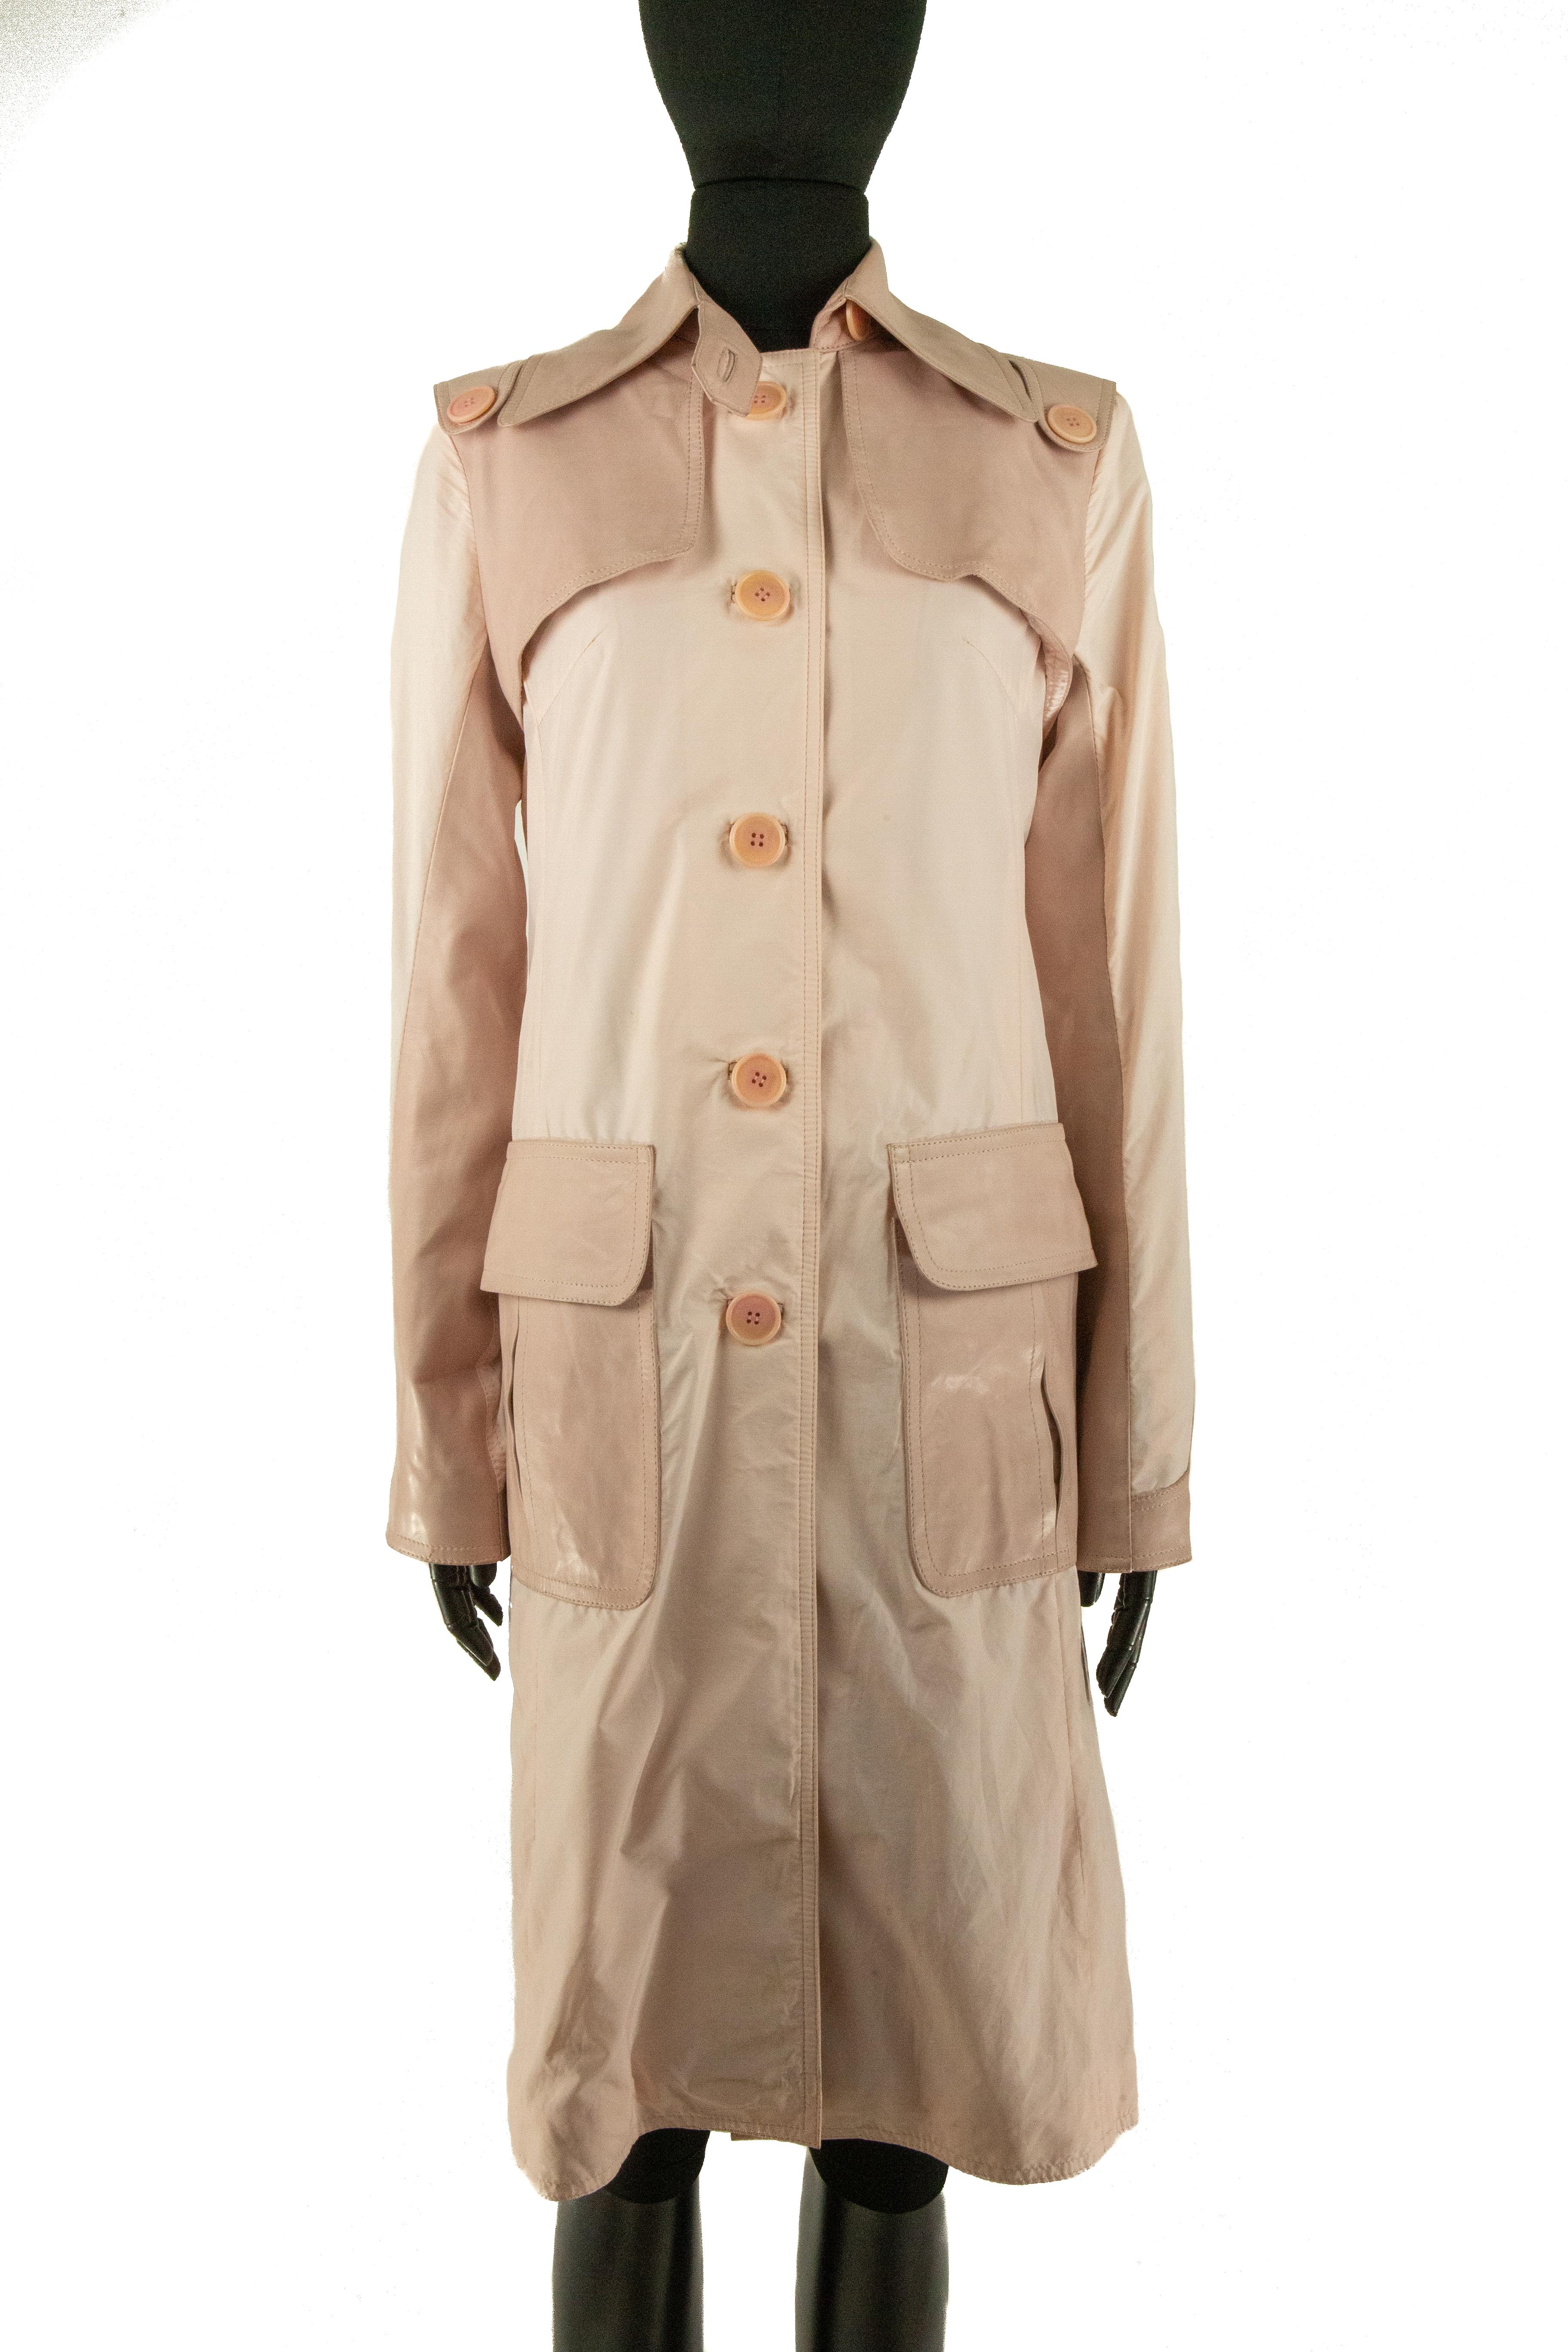 A pastel pink Jitrois coat made from acetate and panels of pink leather. This coat is single-breasted with buttons embossed with ‘Jitrois’ that starts just above the hips and continue to the collar where there’s a strap that can be buttoned up